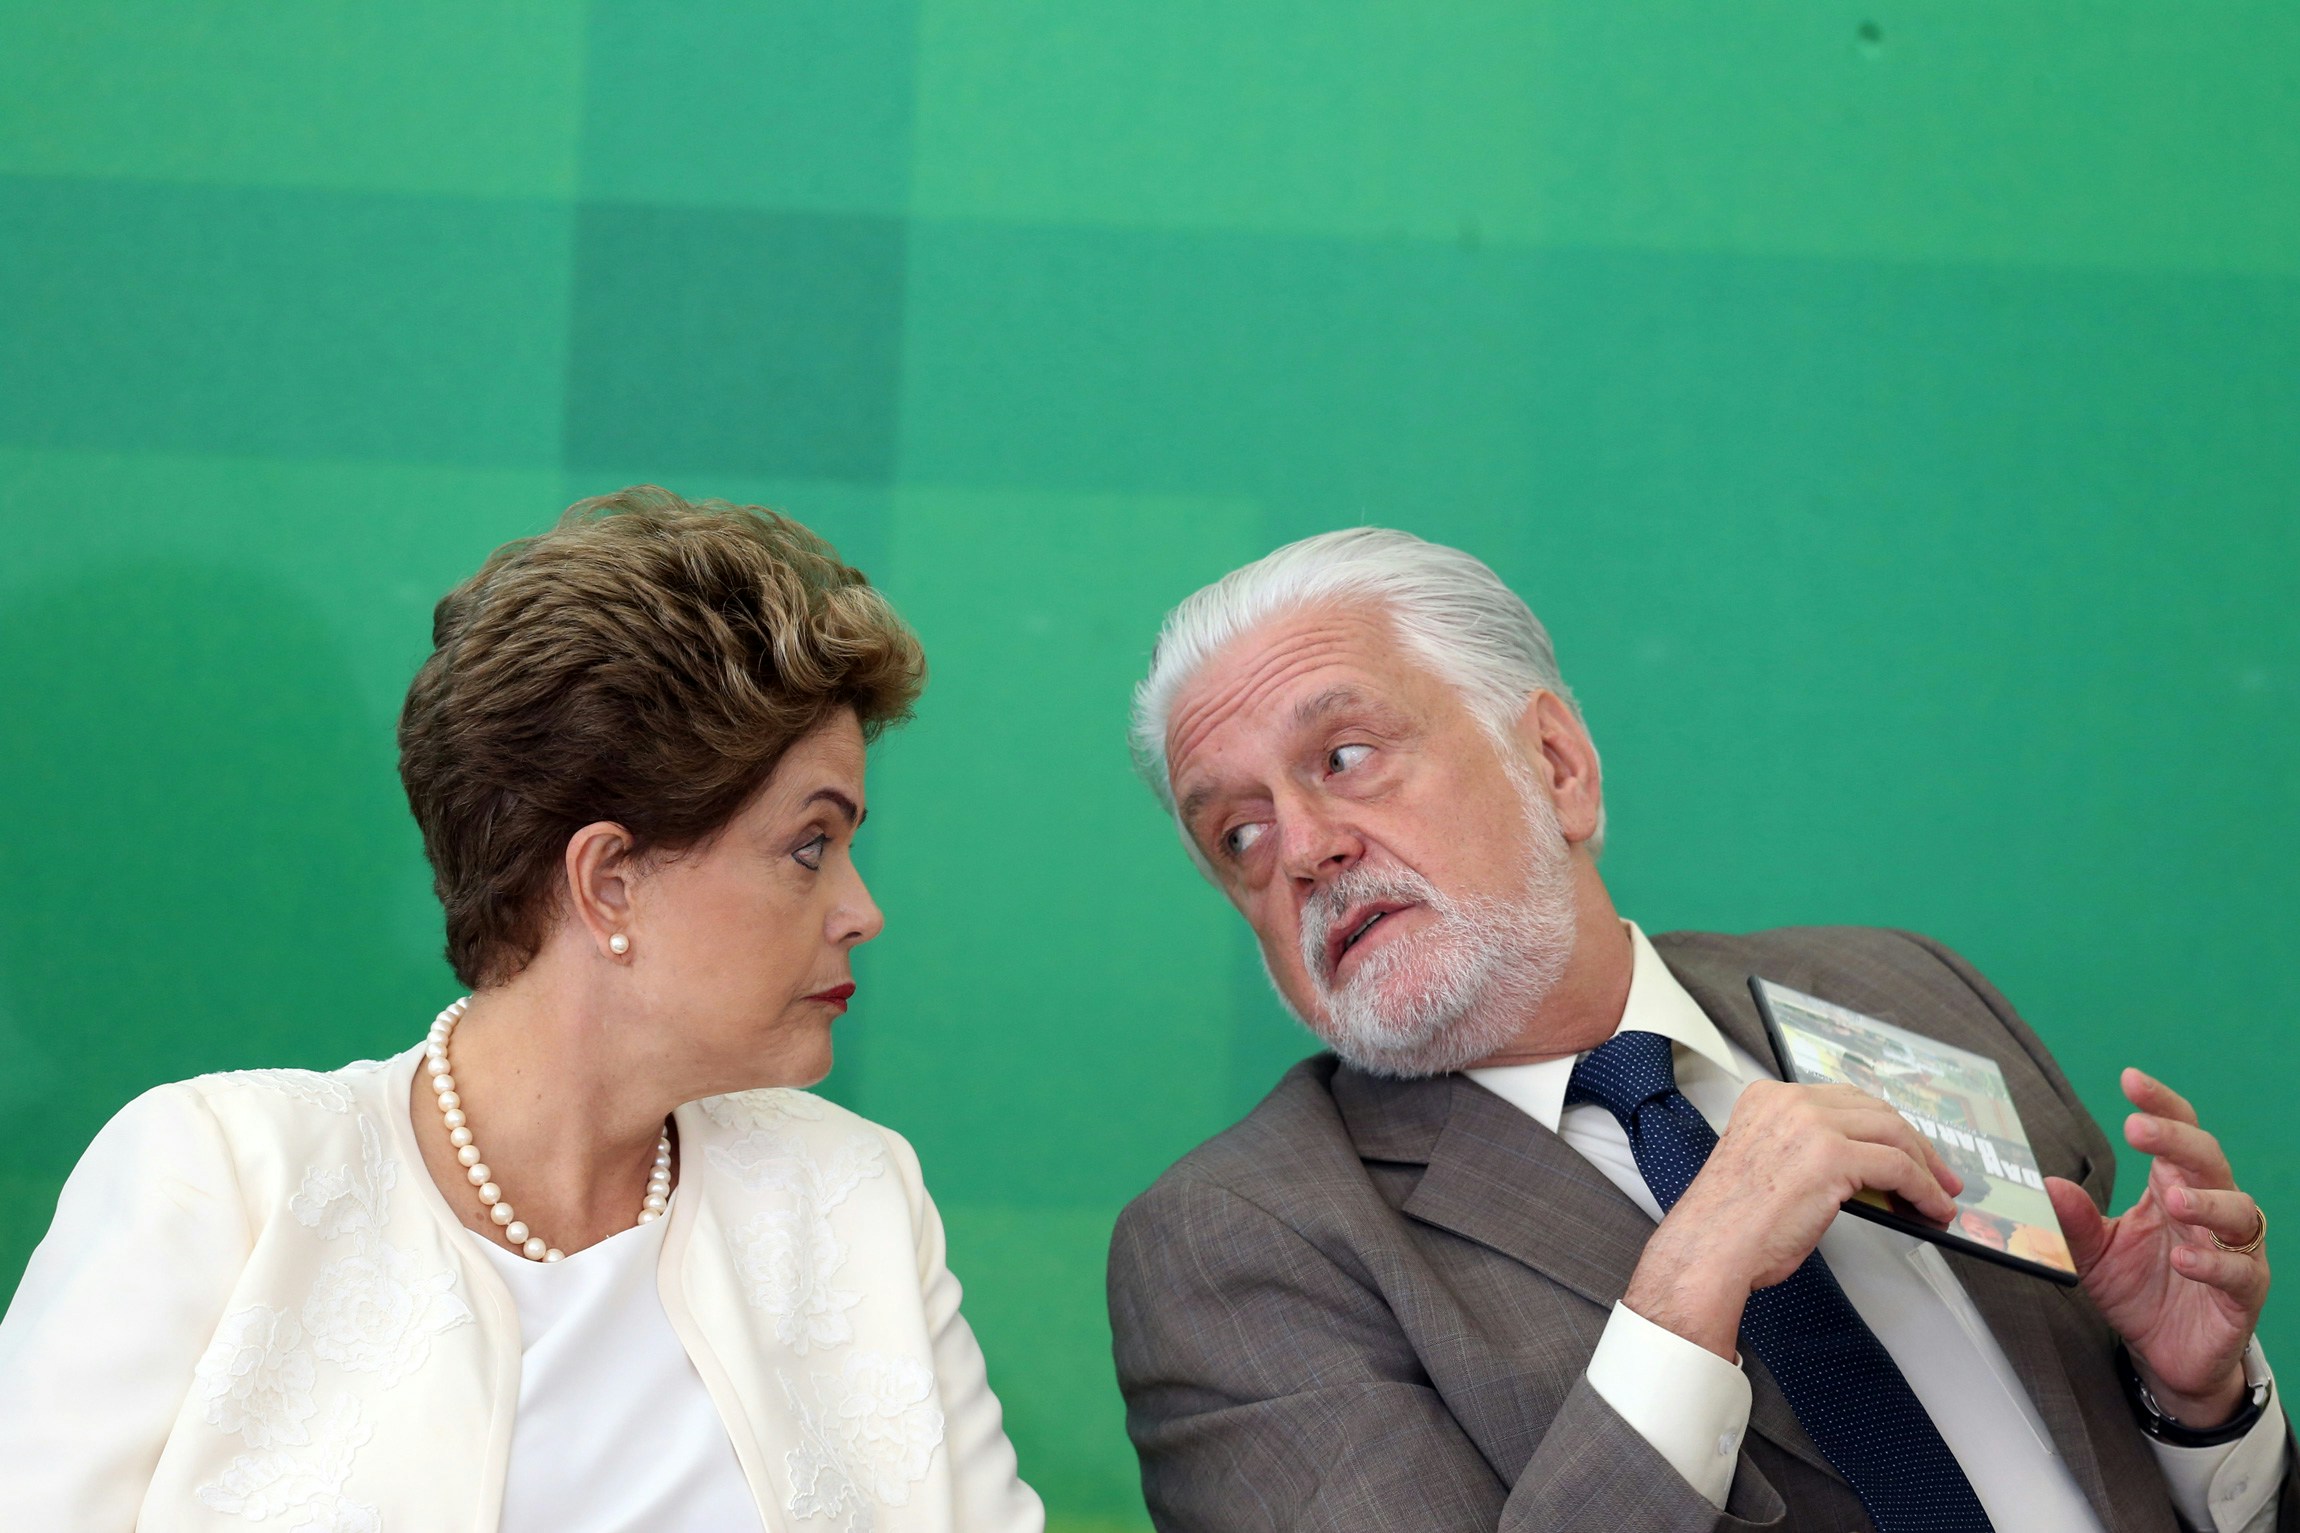 President of Brazil, Dilma Rousseff (L) and the Minister of Governance, Jaques Wagner, commemorative ceremony for the National Black Consciousness Day, at Planalto Palace in Brasilia, capital of Brazil, on November 19, 2015. Photo: ANDRE DUSEK/ESTADAO CONTEUDO (Agencia Estado via AP Images)